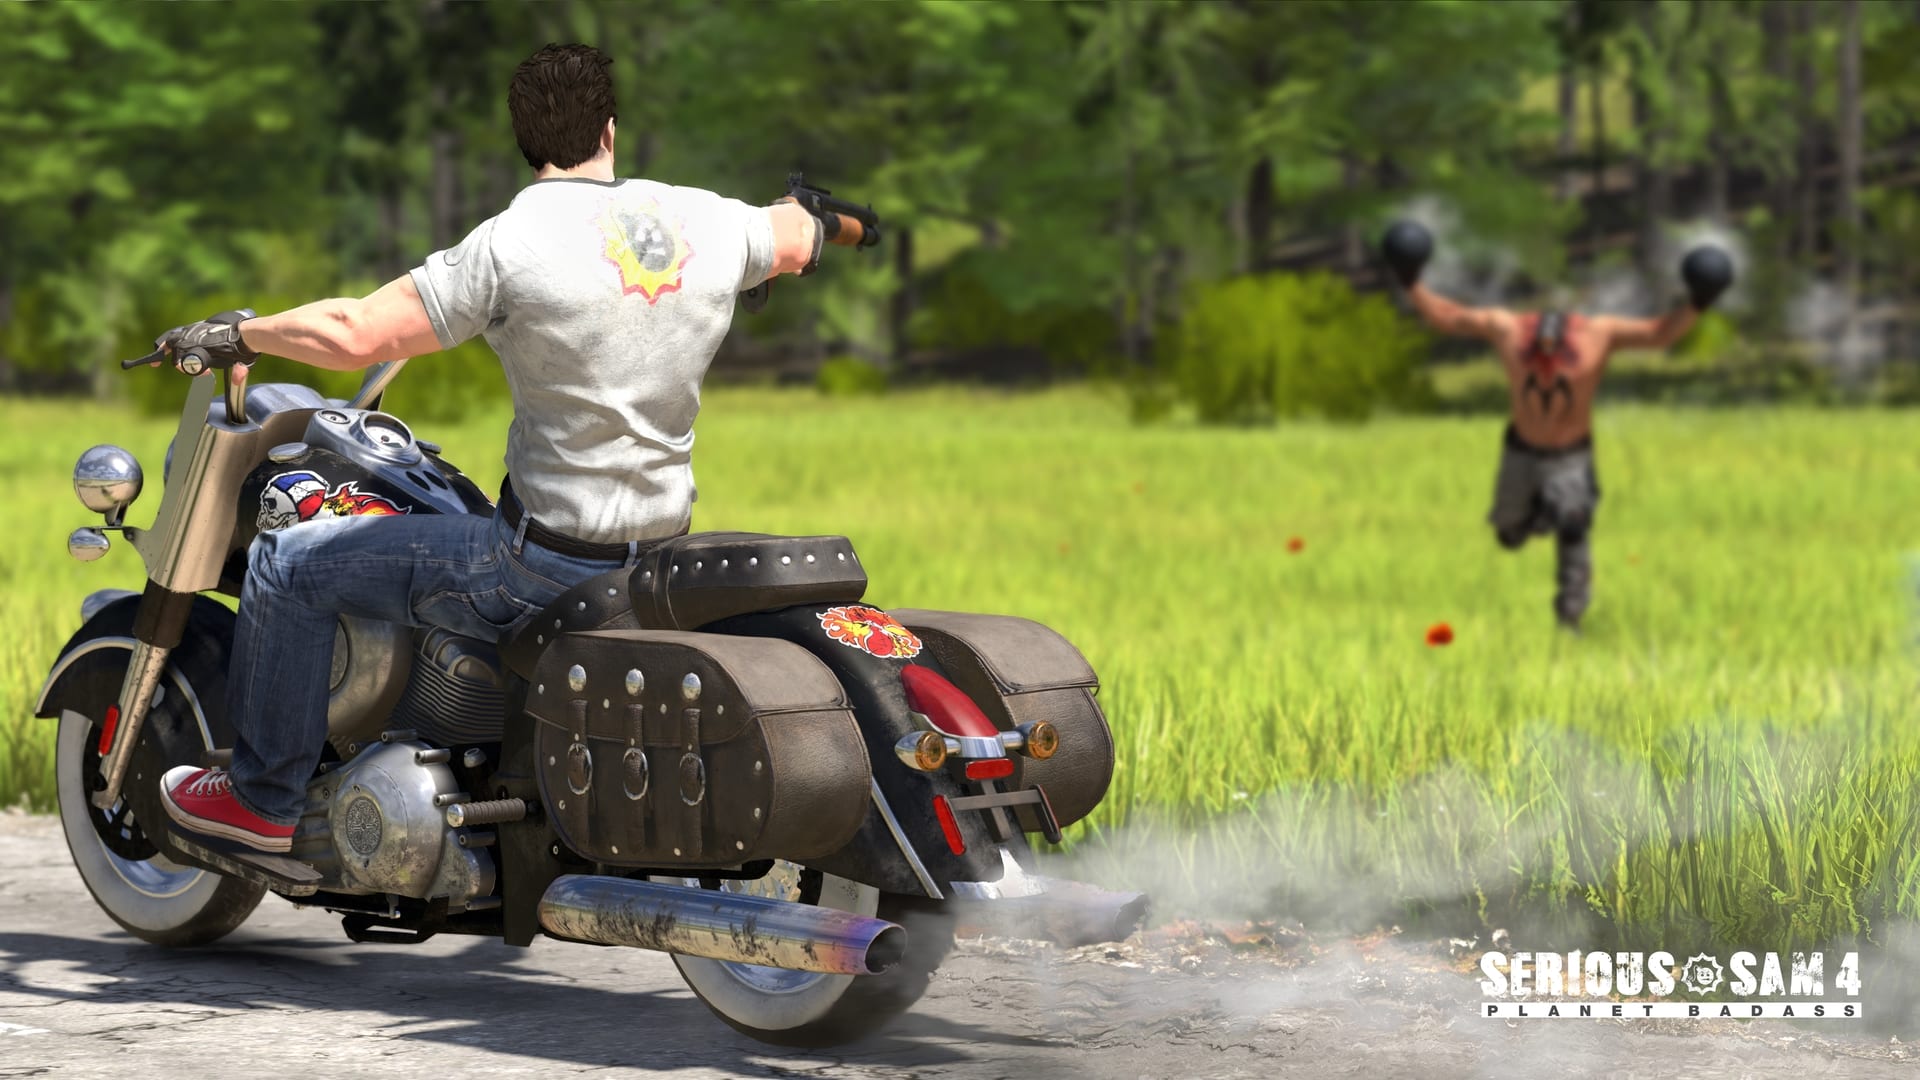 Serious Sam 4 Publisher Gives Look at Auto Shotgun